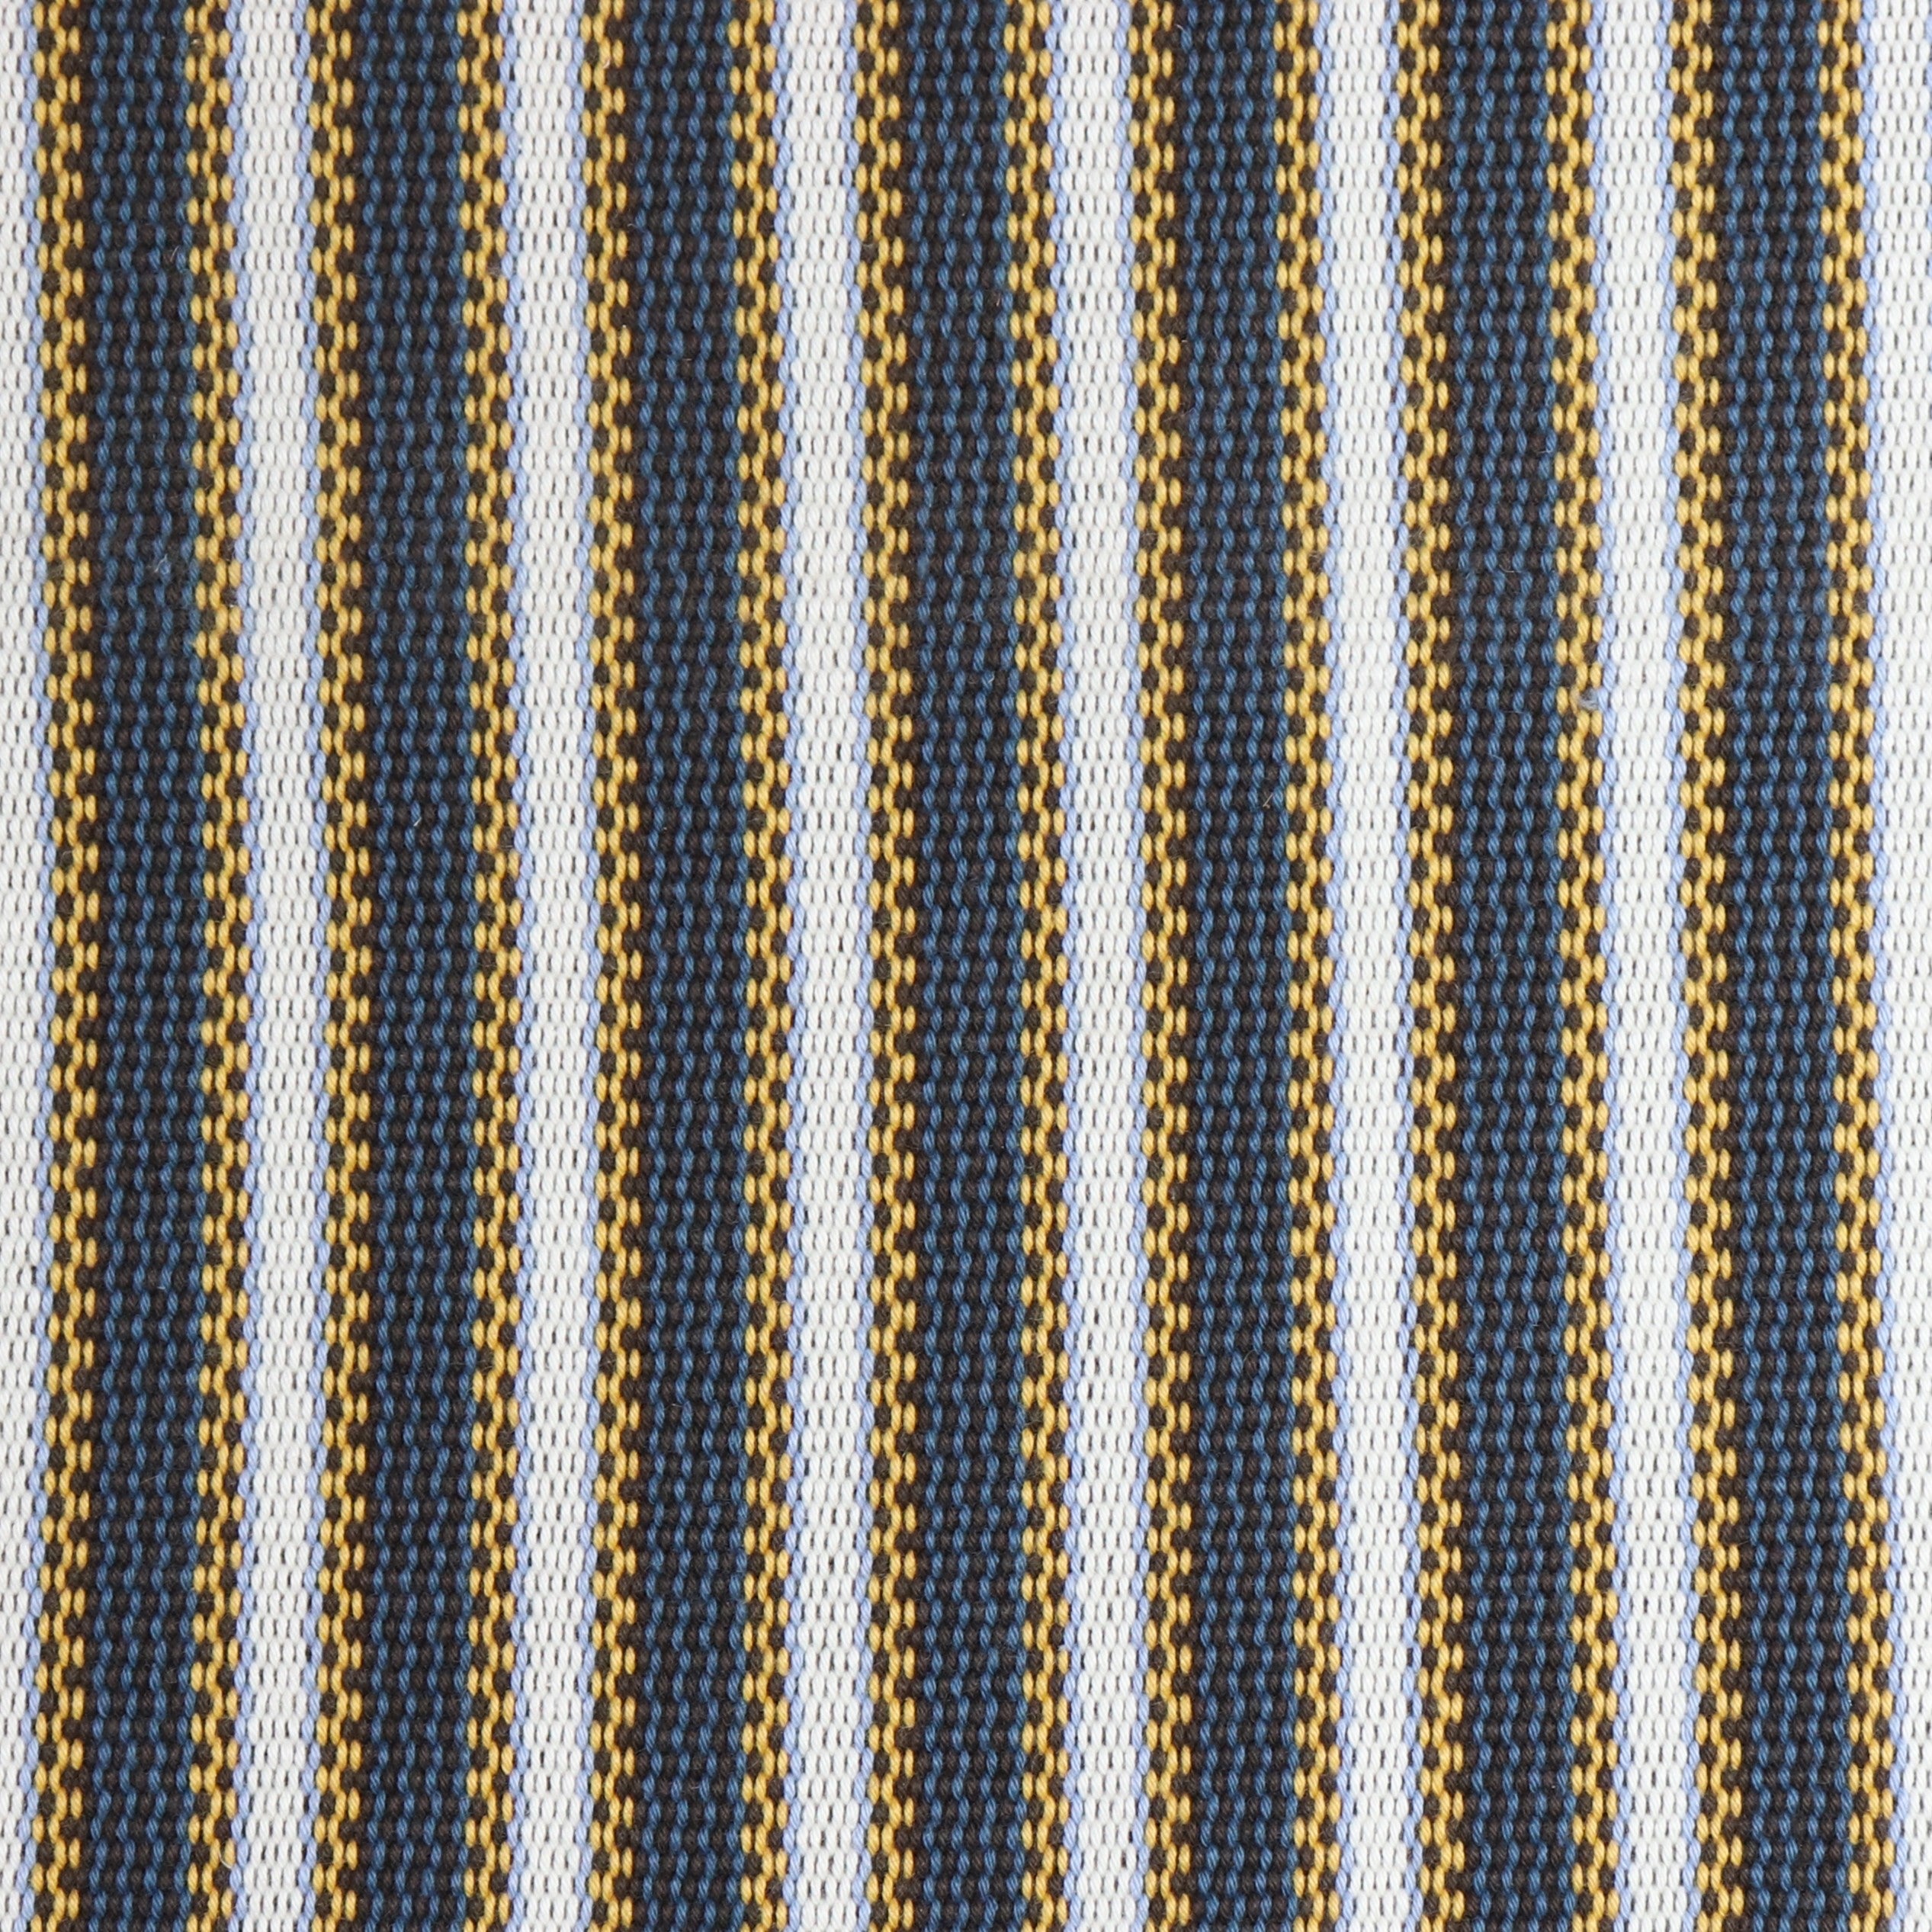 Detail of a hand-woven cotton fabric in an intricate stripe pattern in shades of blue, brown, yellow and white.